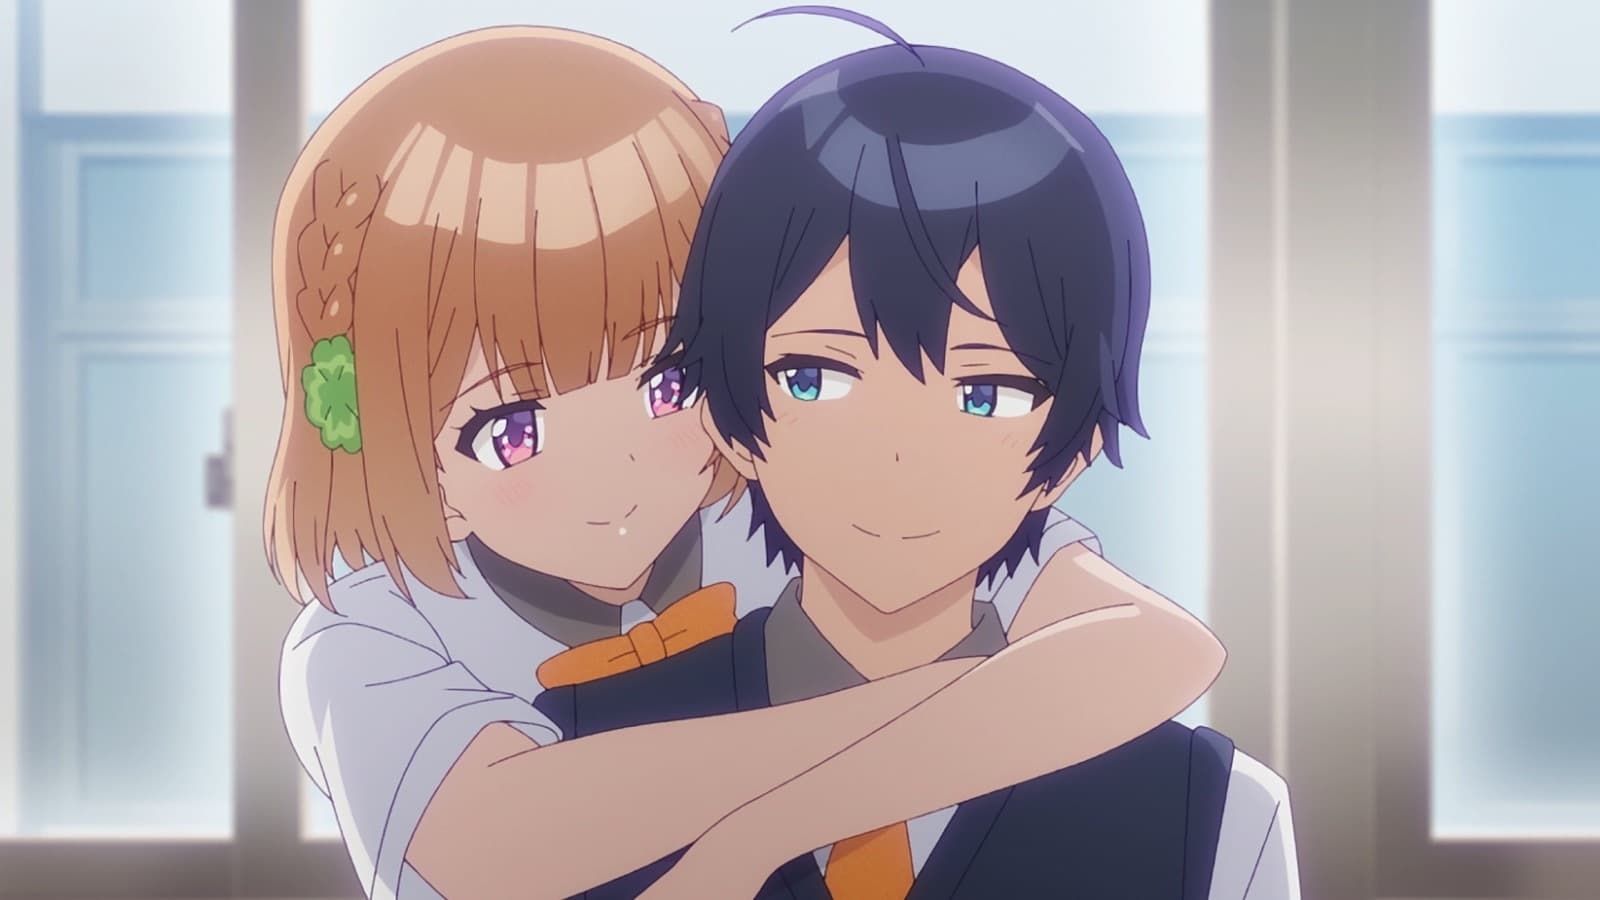 The 20 Mature Romance Anime With GrownUp Couples